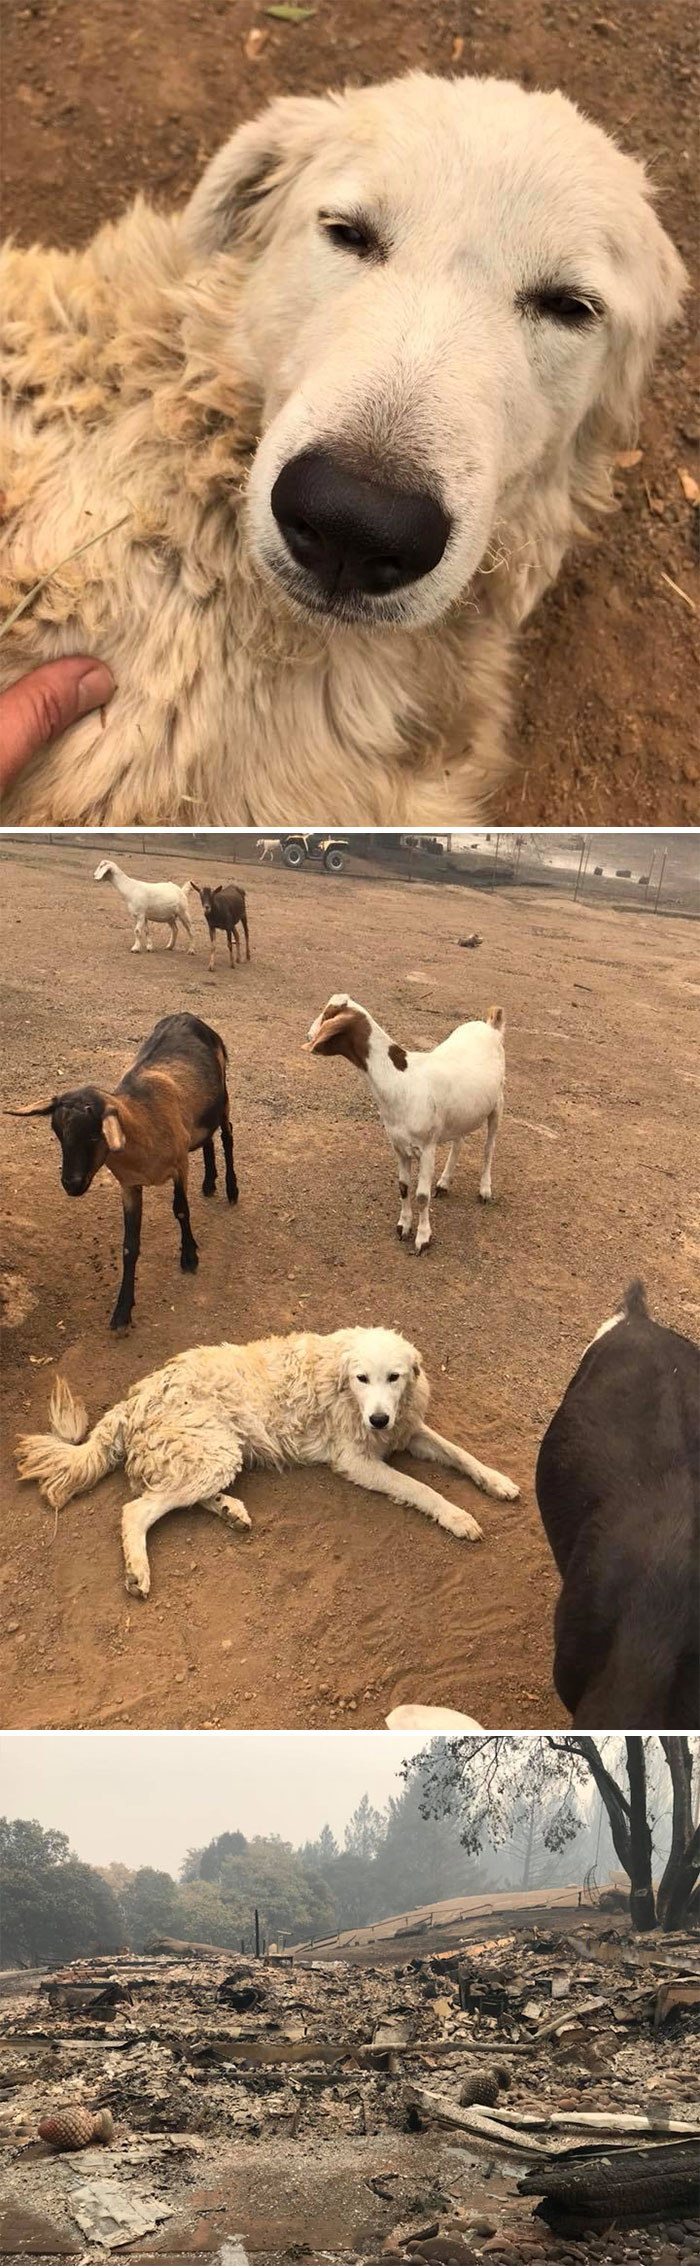 A Fearless Goat-Herding Dog Called Odin Refused To Abandon His Flock Of Goats During Deadly California Wildfires In 2017, While His Owners Ran To Safety. Days Later His Family Returned To Their Destroyed Home And Found Him And The Goats Still Alive